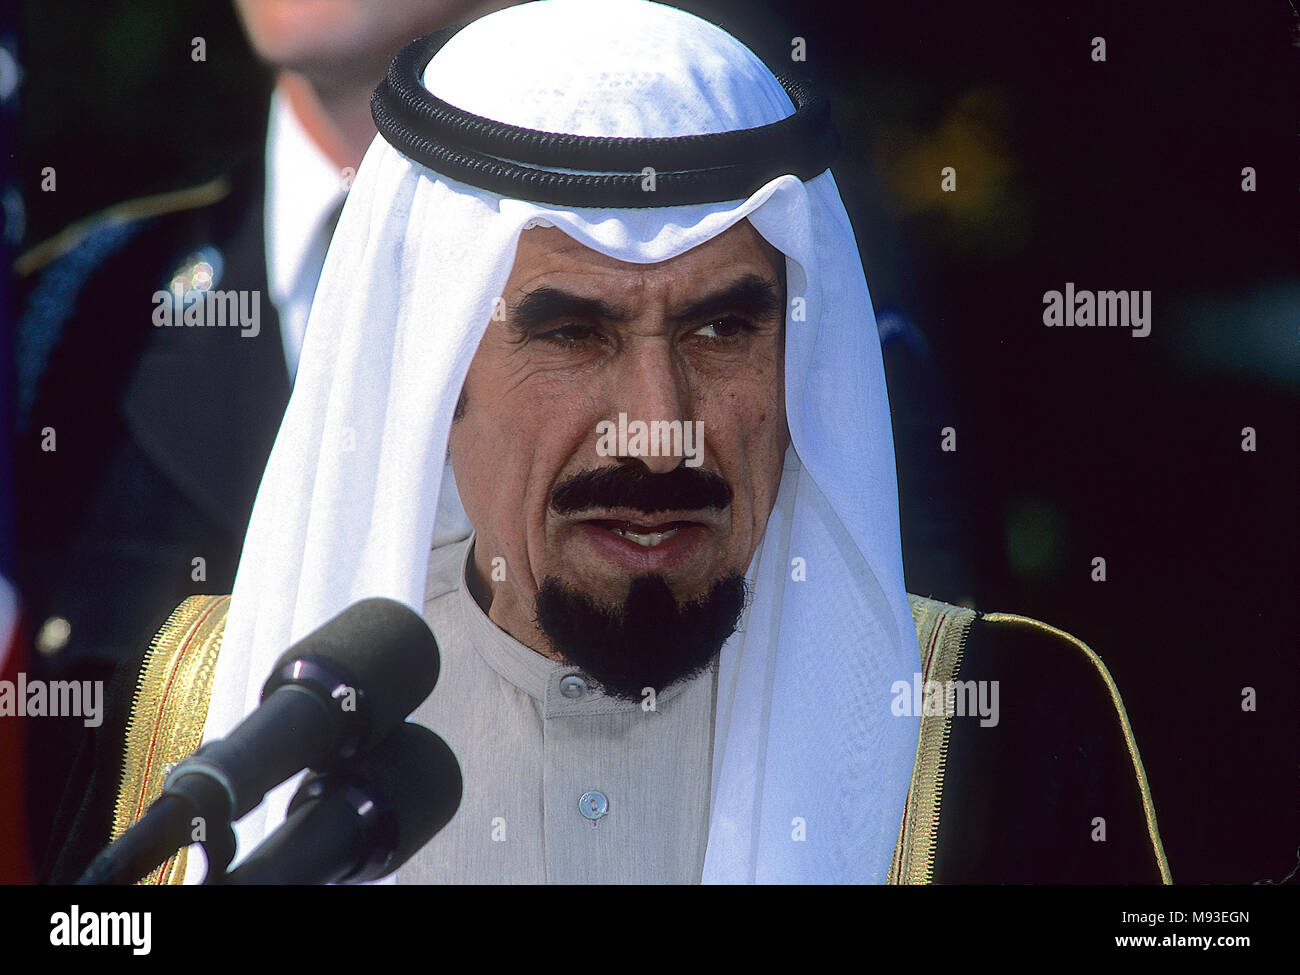 Washington, DC., September 28, 1990  The Emir of Kuwait Sheik Jaber III Al-Ahmad Al-Jaber Al-Sabah speaks to the press on the South Lawn of the White House during visit after the invasion of Kuwait by Iraq. Credit: Mark Reinstein/MediaPunch Stock Photo